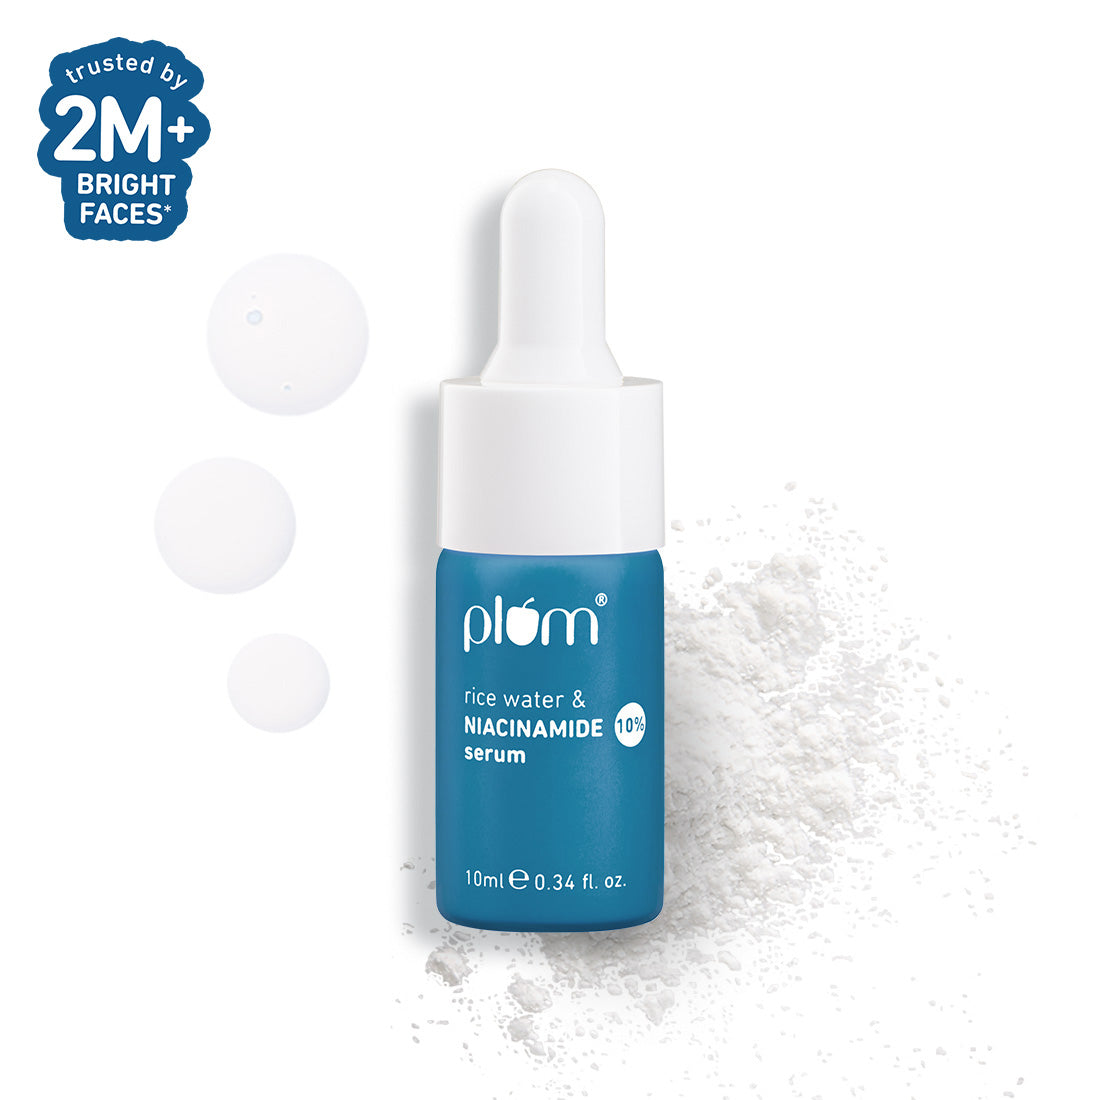 10% Niacinamide Face Serum with Rice Water